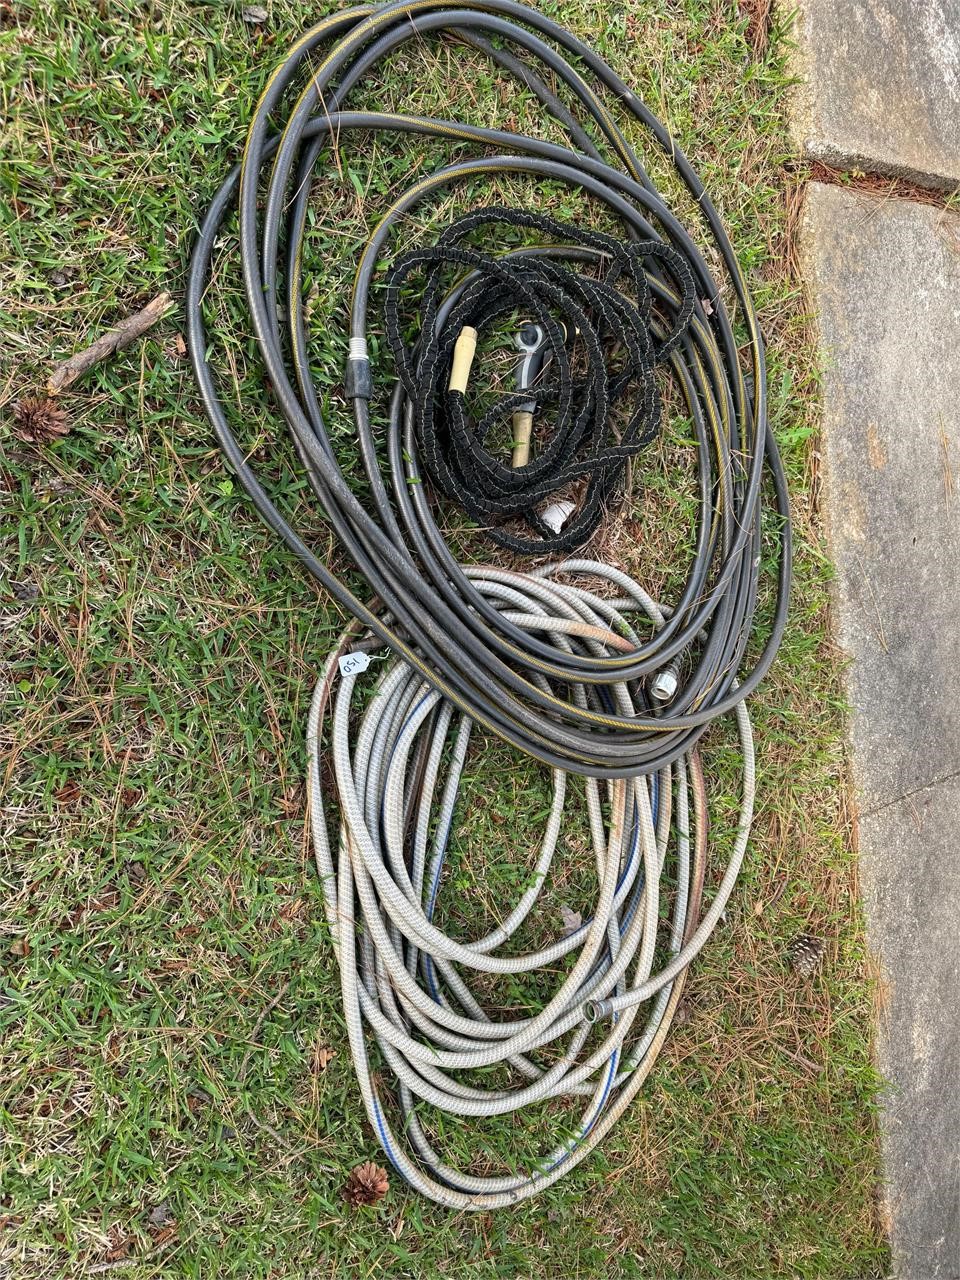 3 water hoses